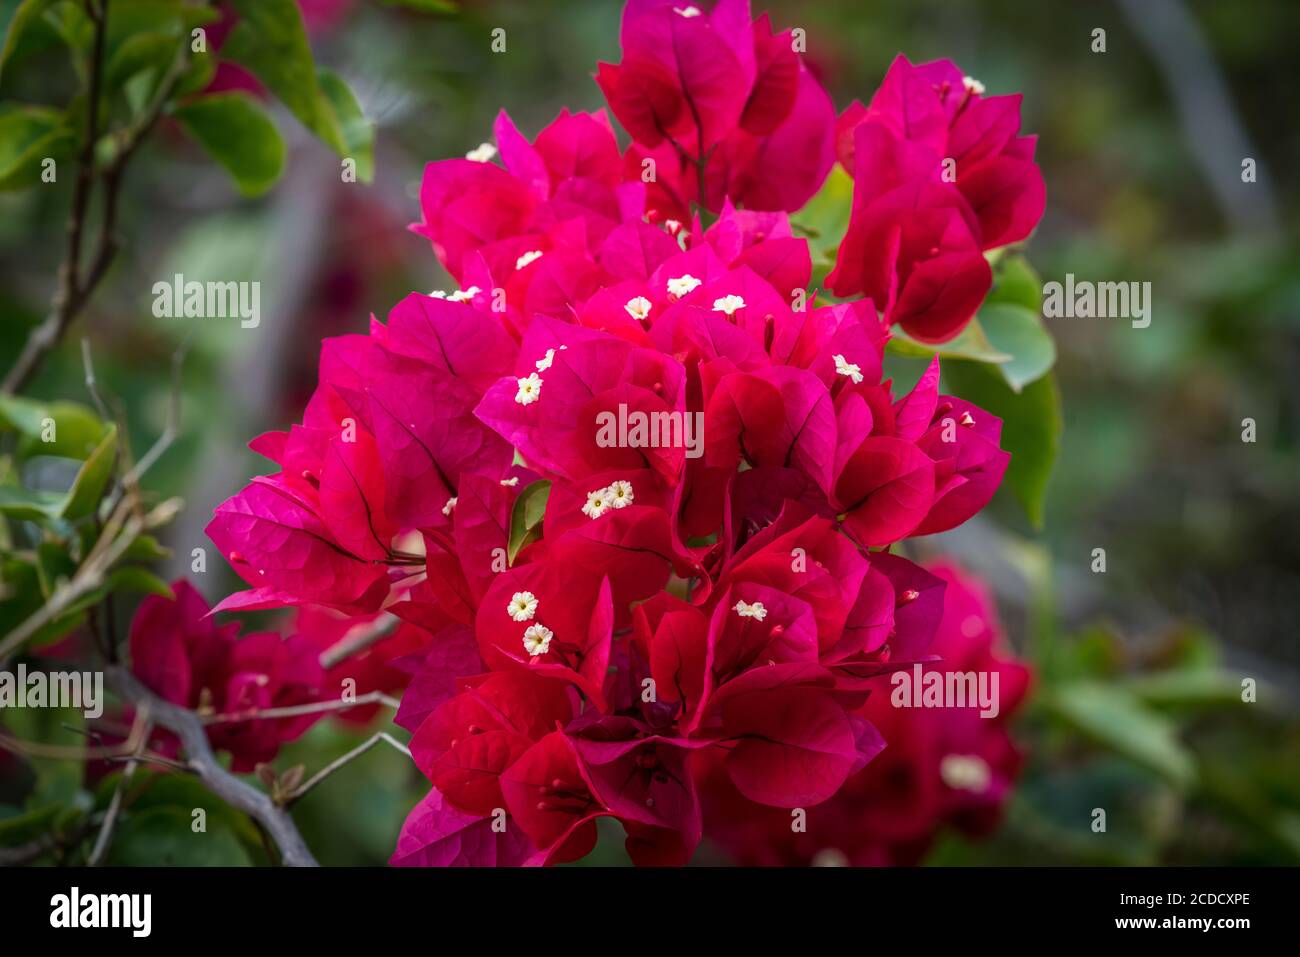 Bougainvillea Flowers Genus Bougainvillea At The Ruins In Tulum National Park In Quintana Roo Mexico The Actual Flower Is The Very Small Pale Yel Stock Photo Alamy